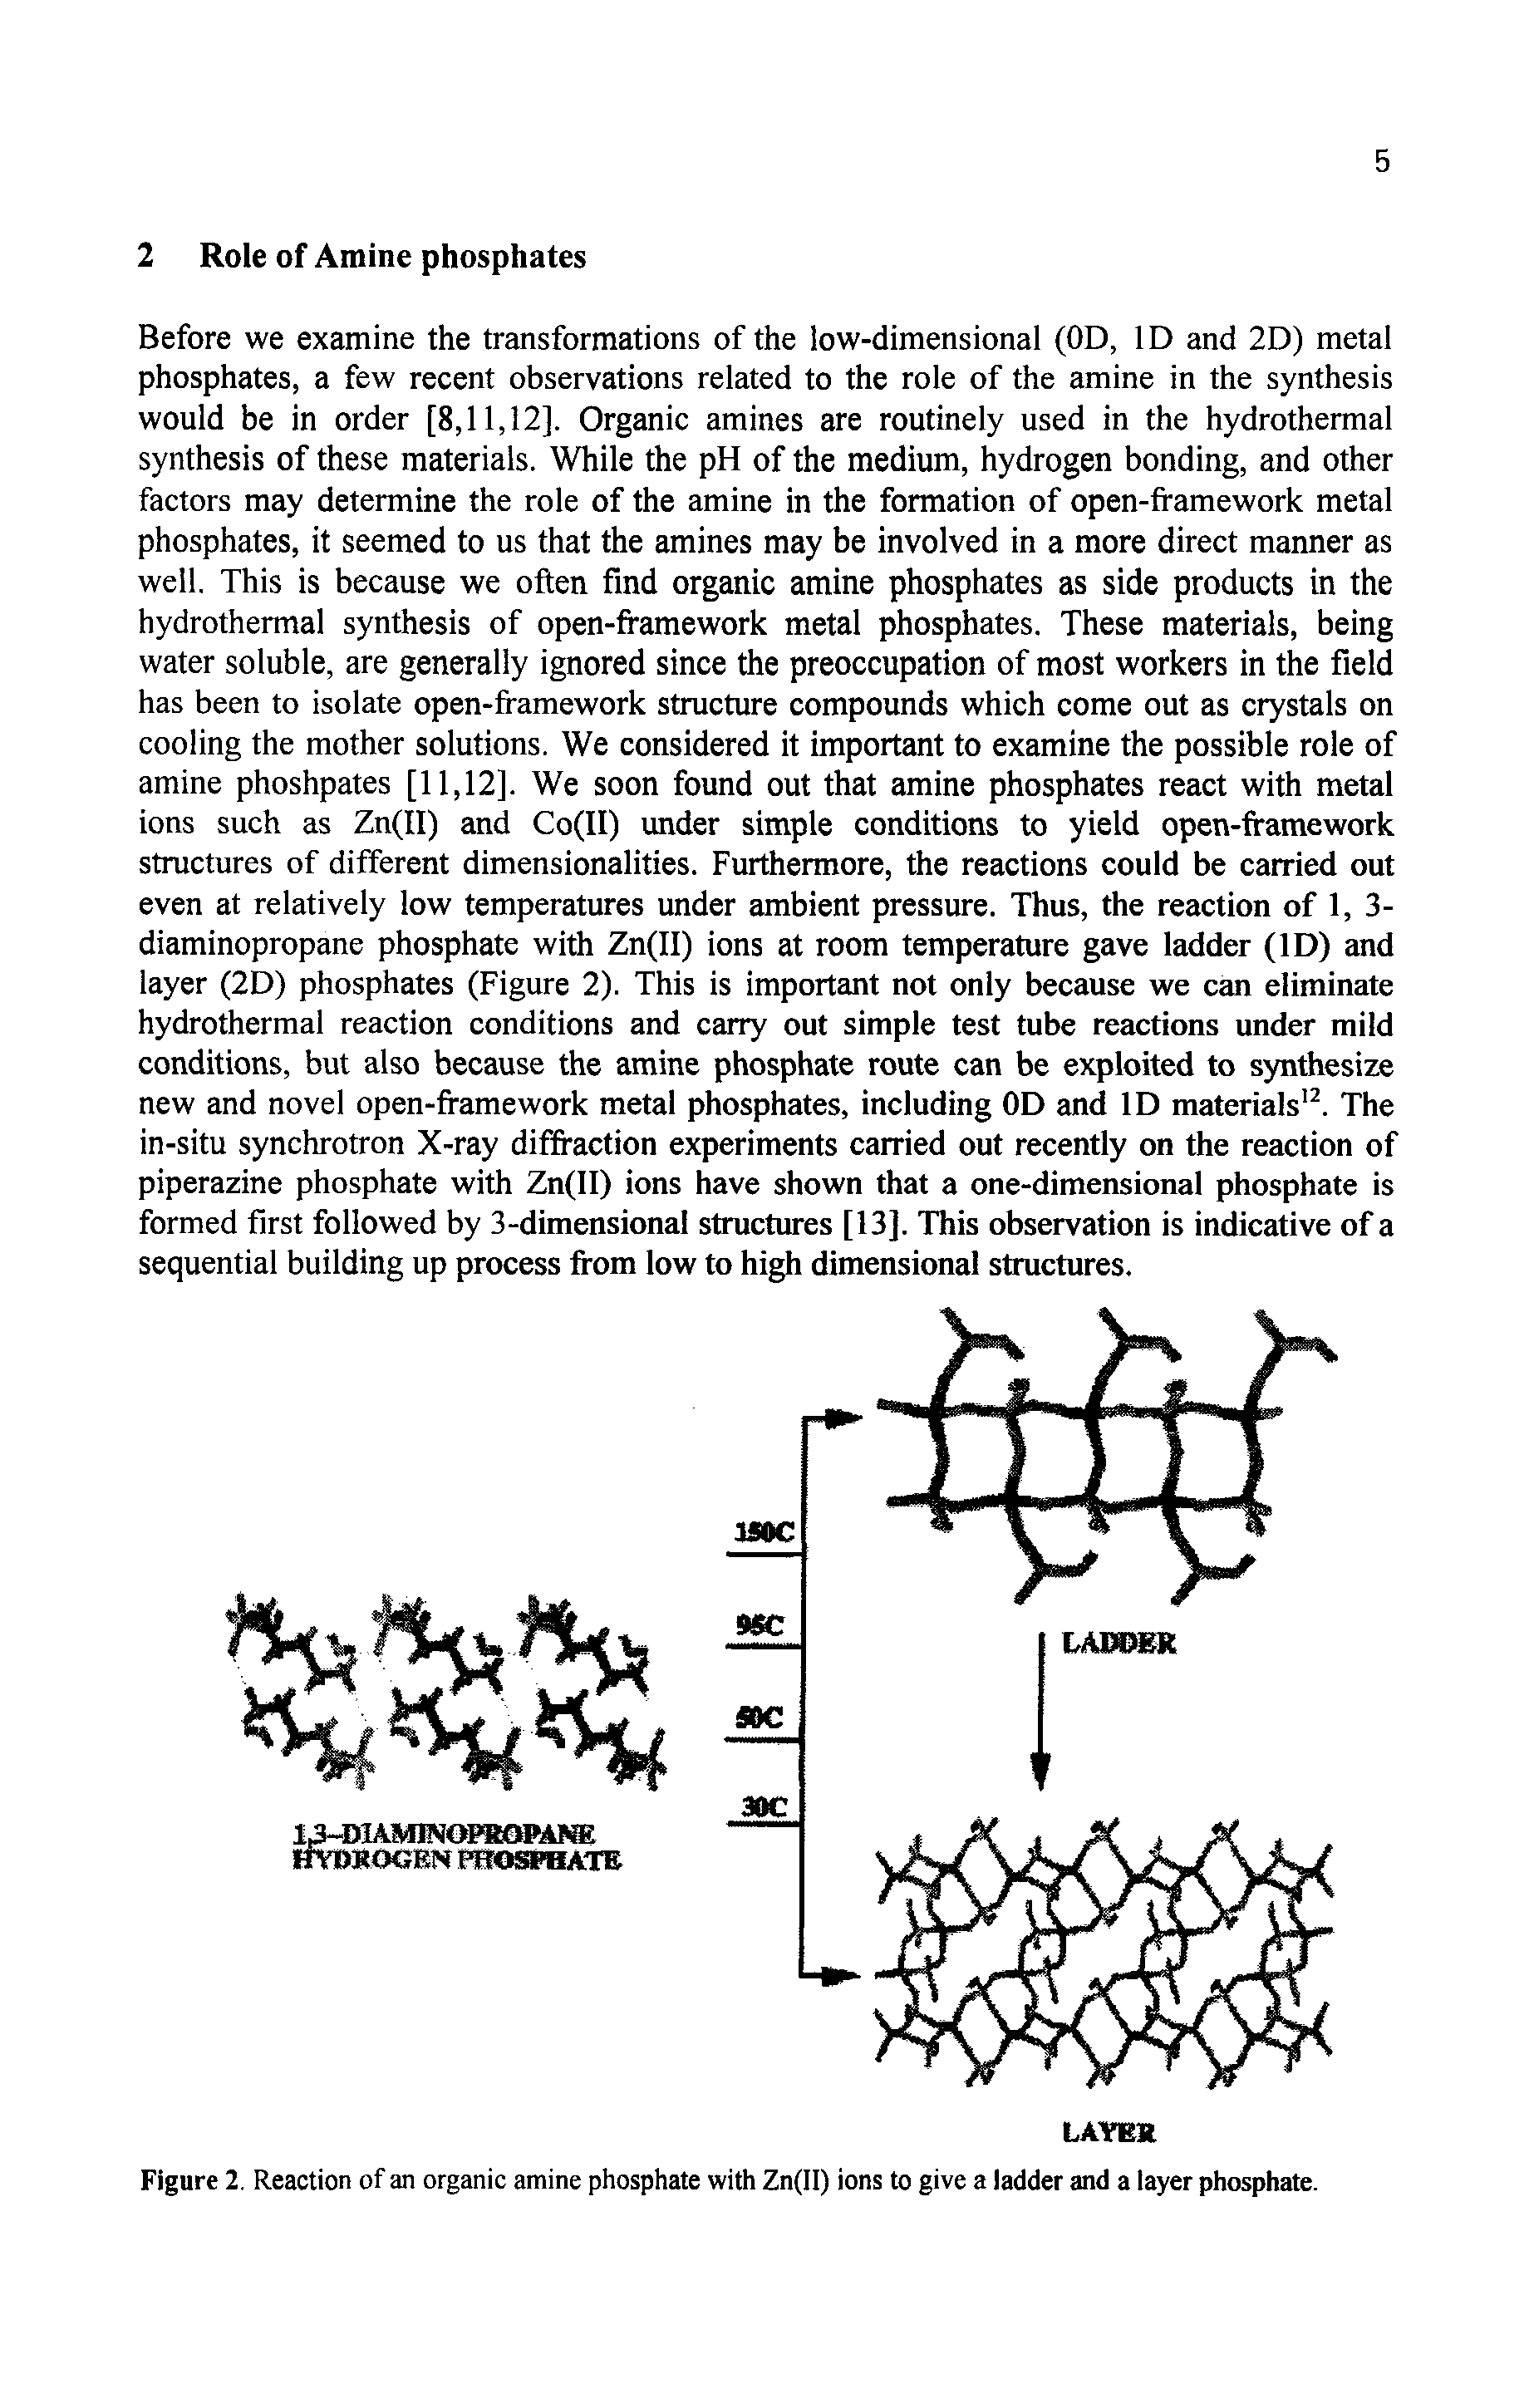 Figure 2. Reaction of an organic amine phosphate with Zn(II) ions to give a iadder and a layer phosphate.